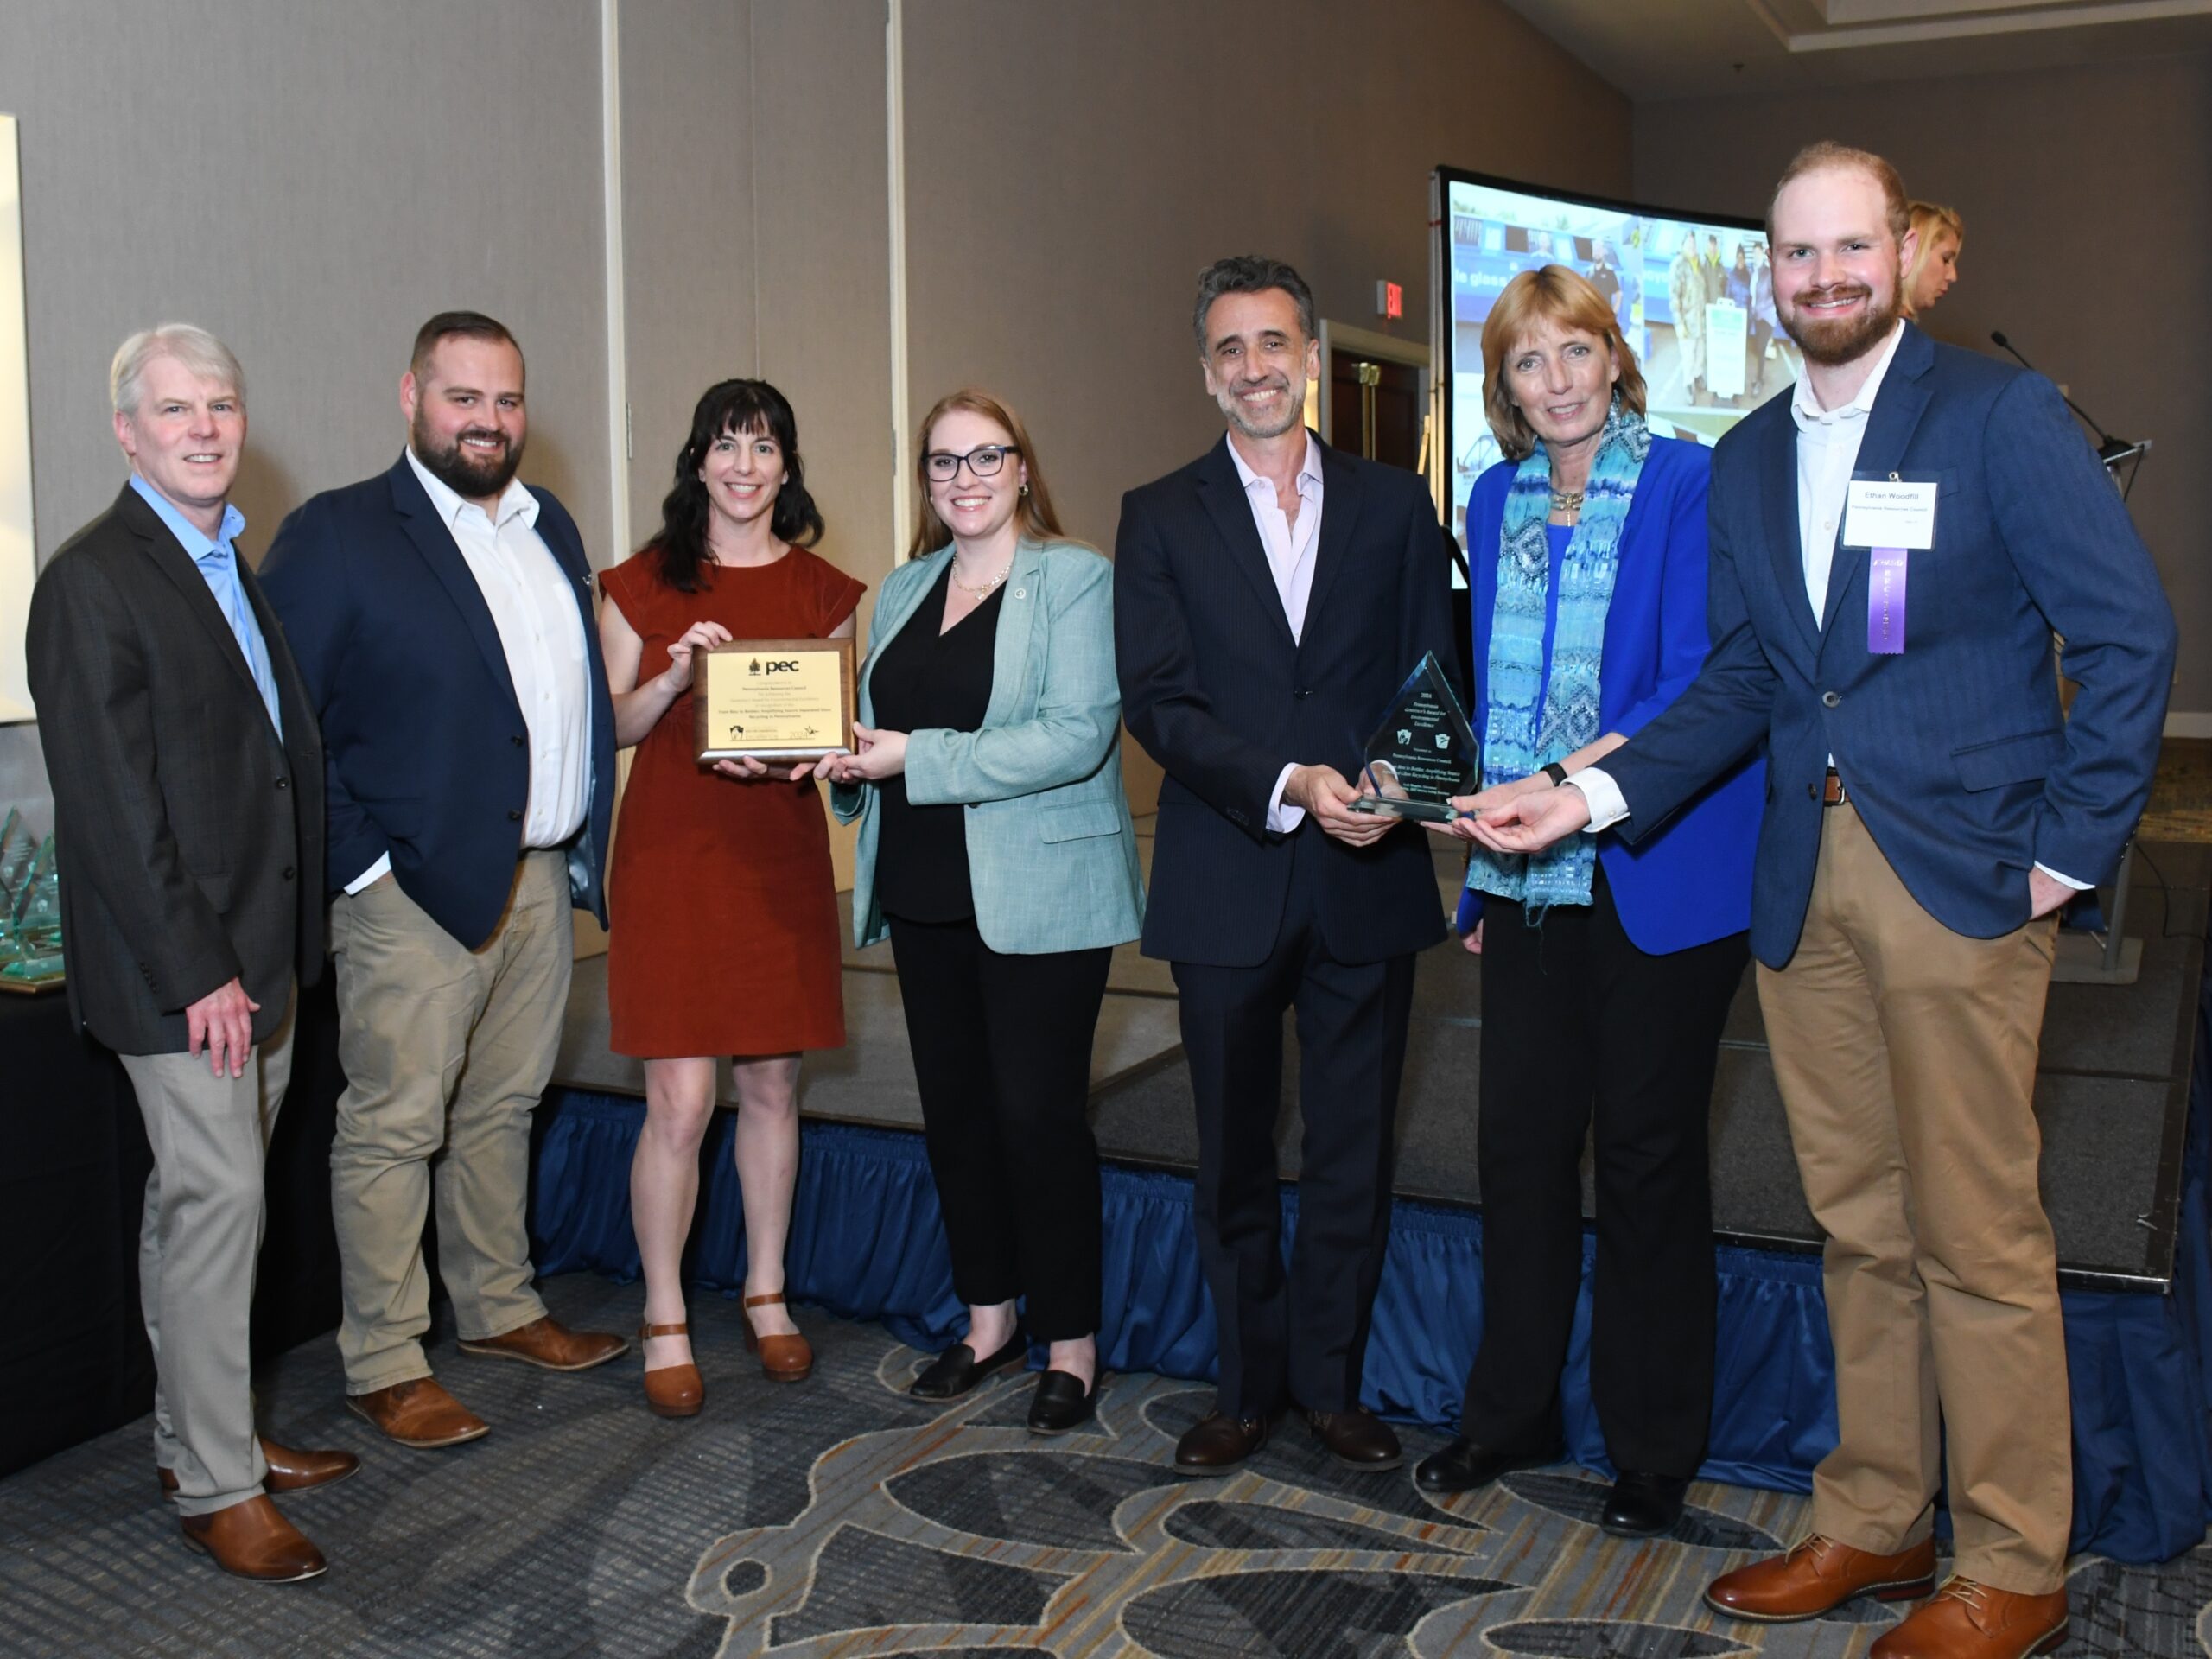 PRC glass recycling program, other area efforts earn Governor’s Awards for Environmental Excellence